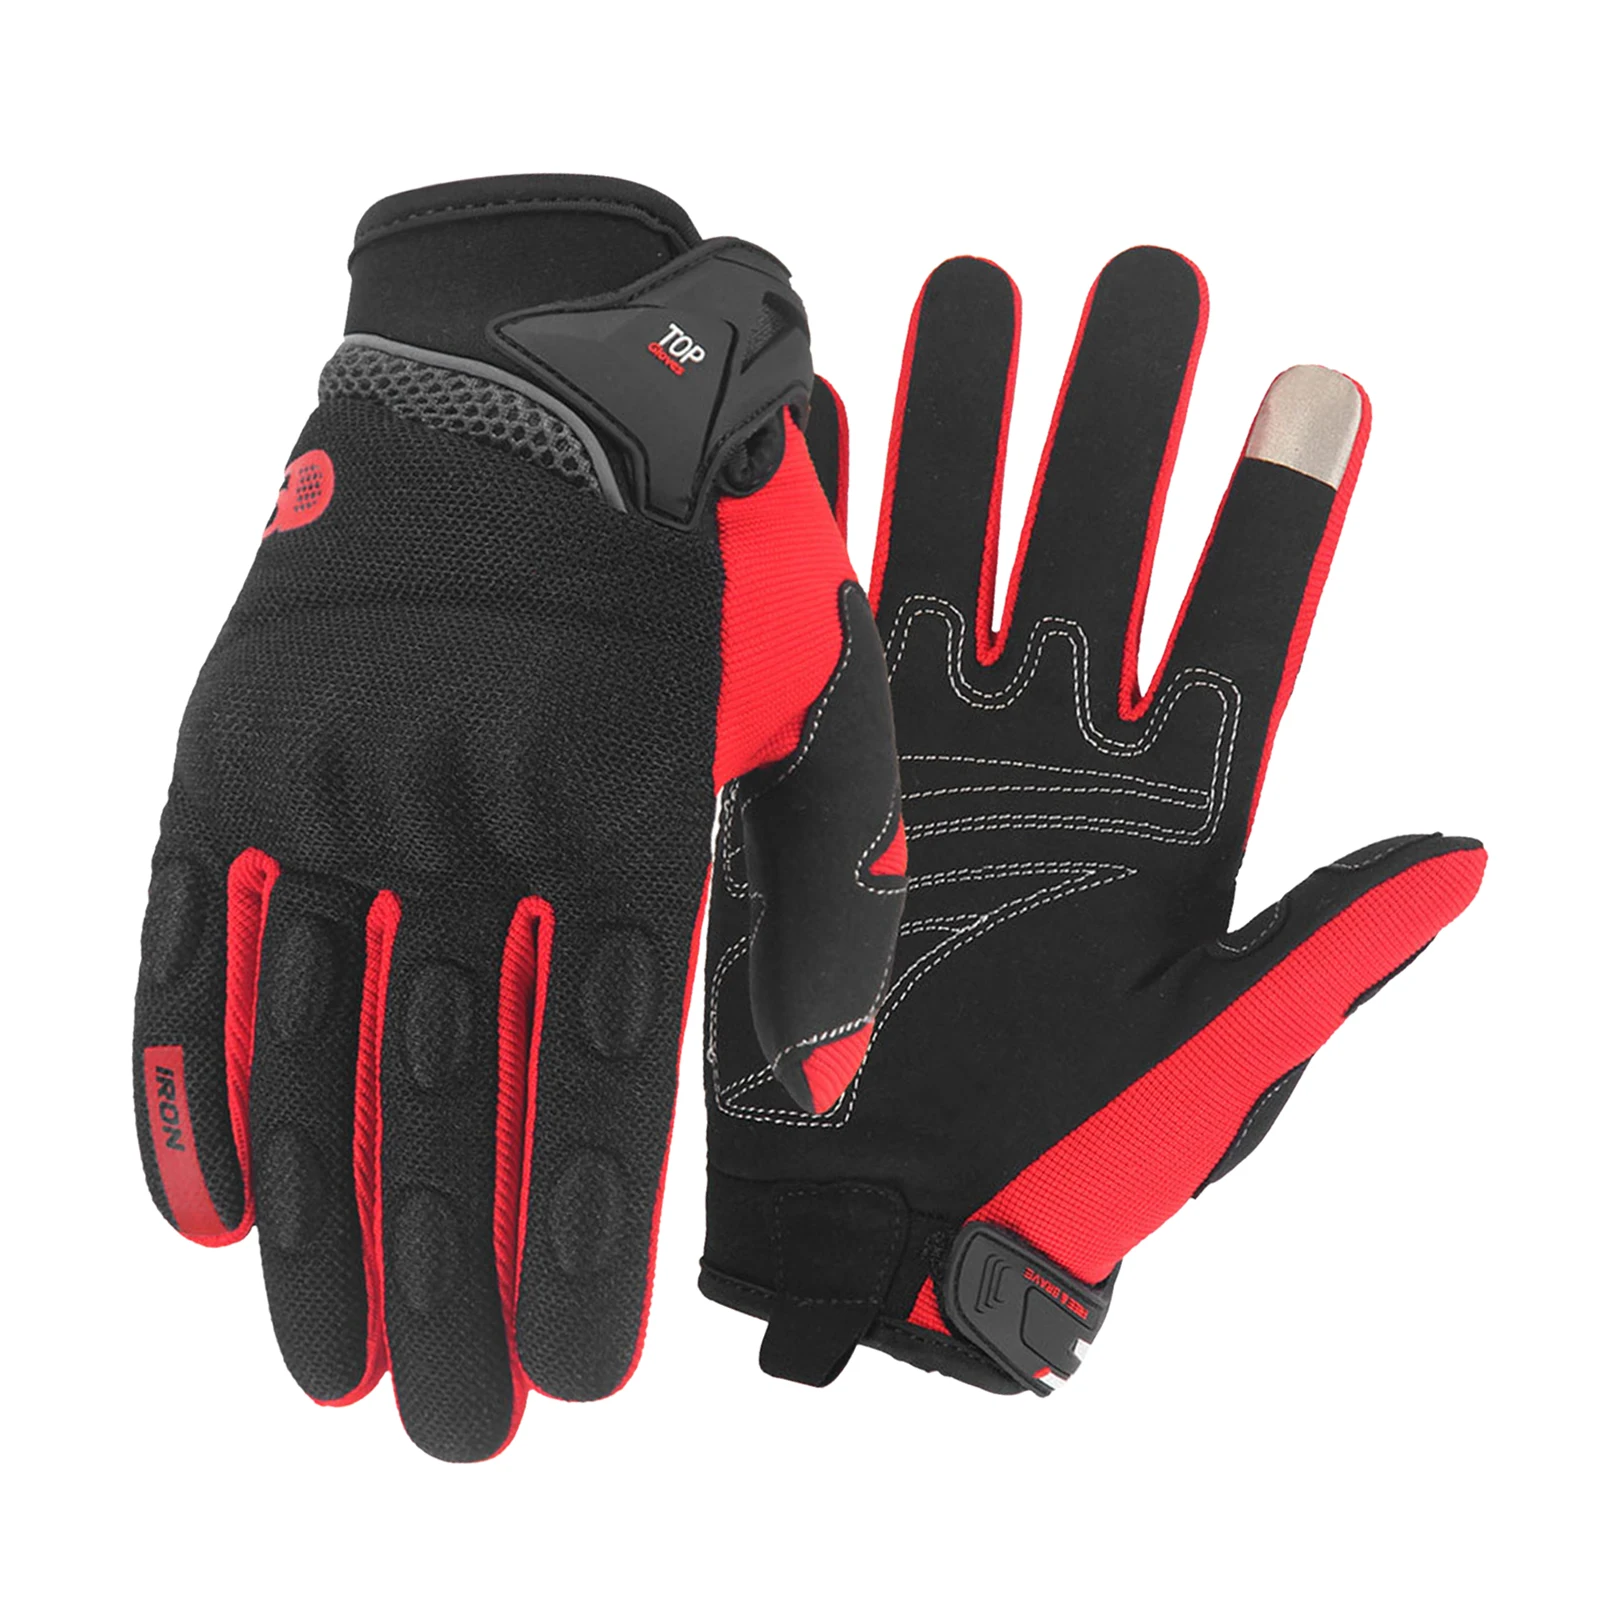 1 Pair Motorcycle Gloves Touch screen Motocross Racing Gloves Motorbike Moto AntiSlip Summer Gloves Cycling Full Finger Guantes